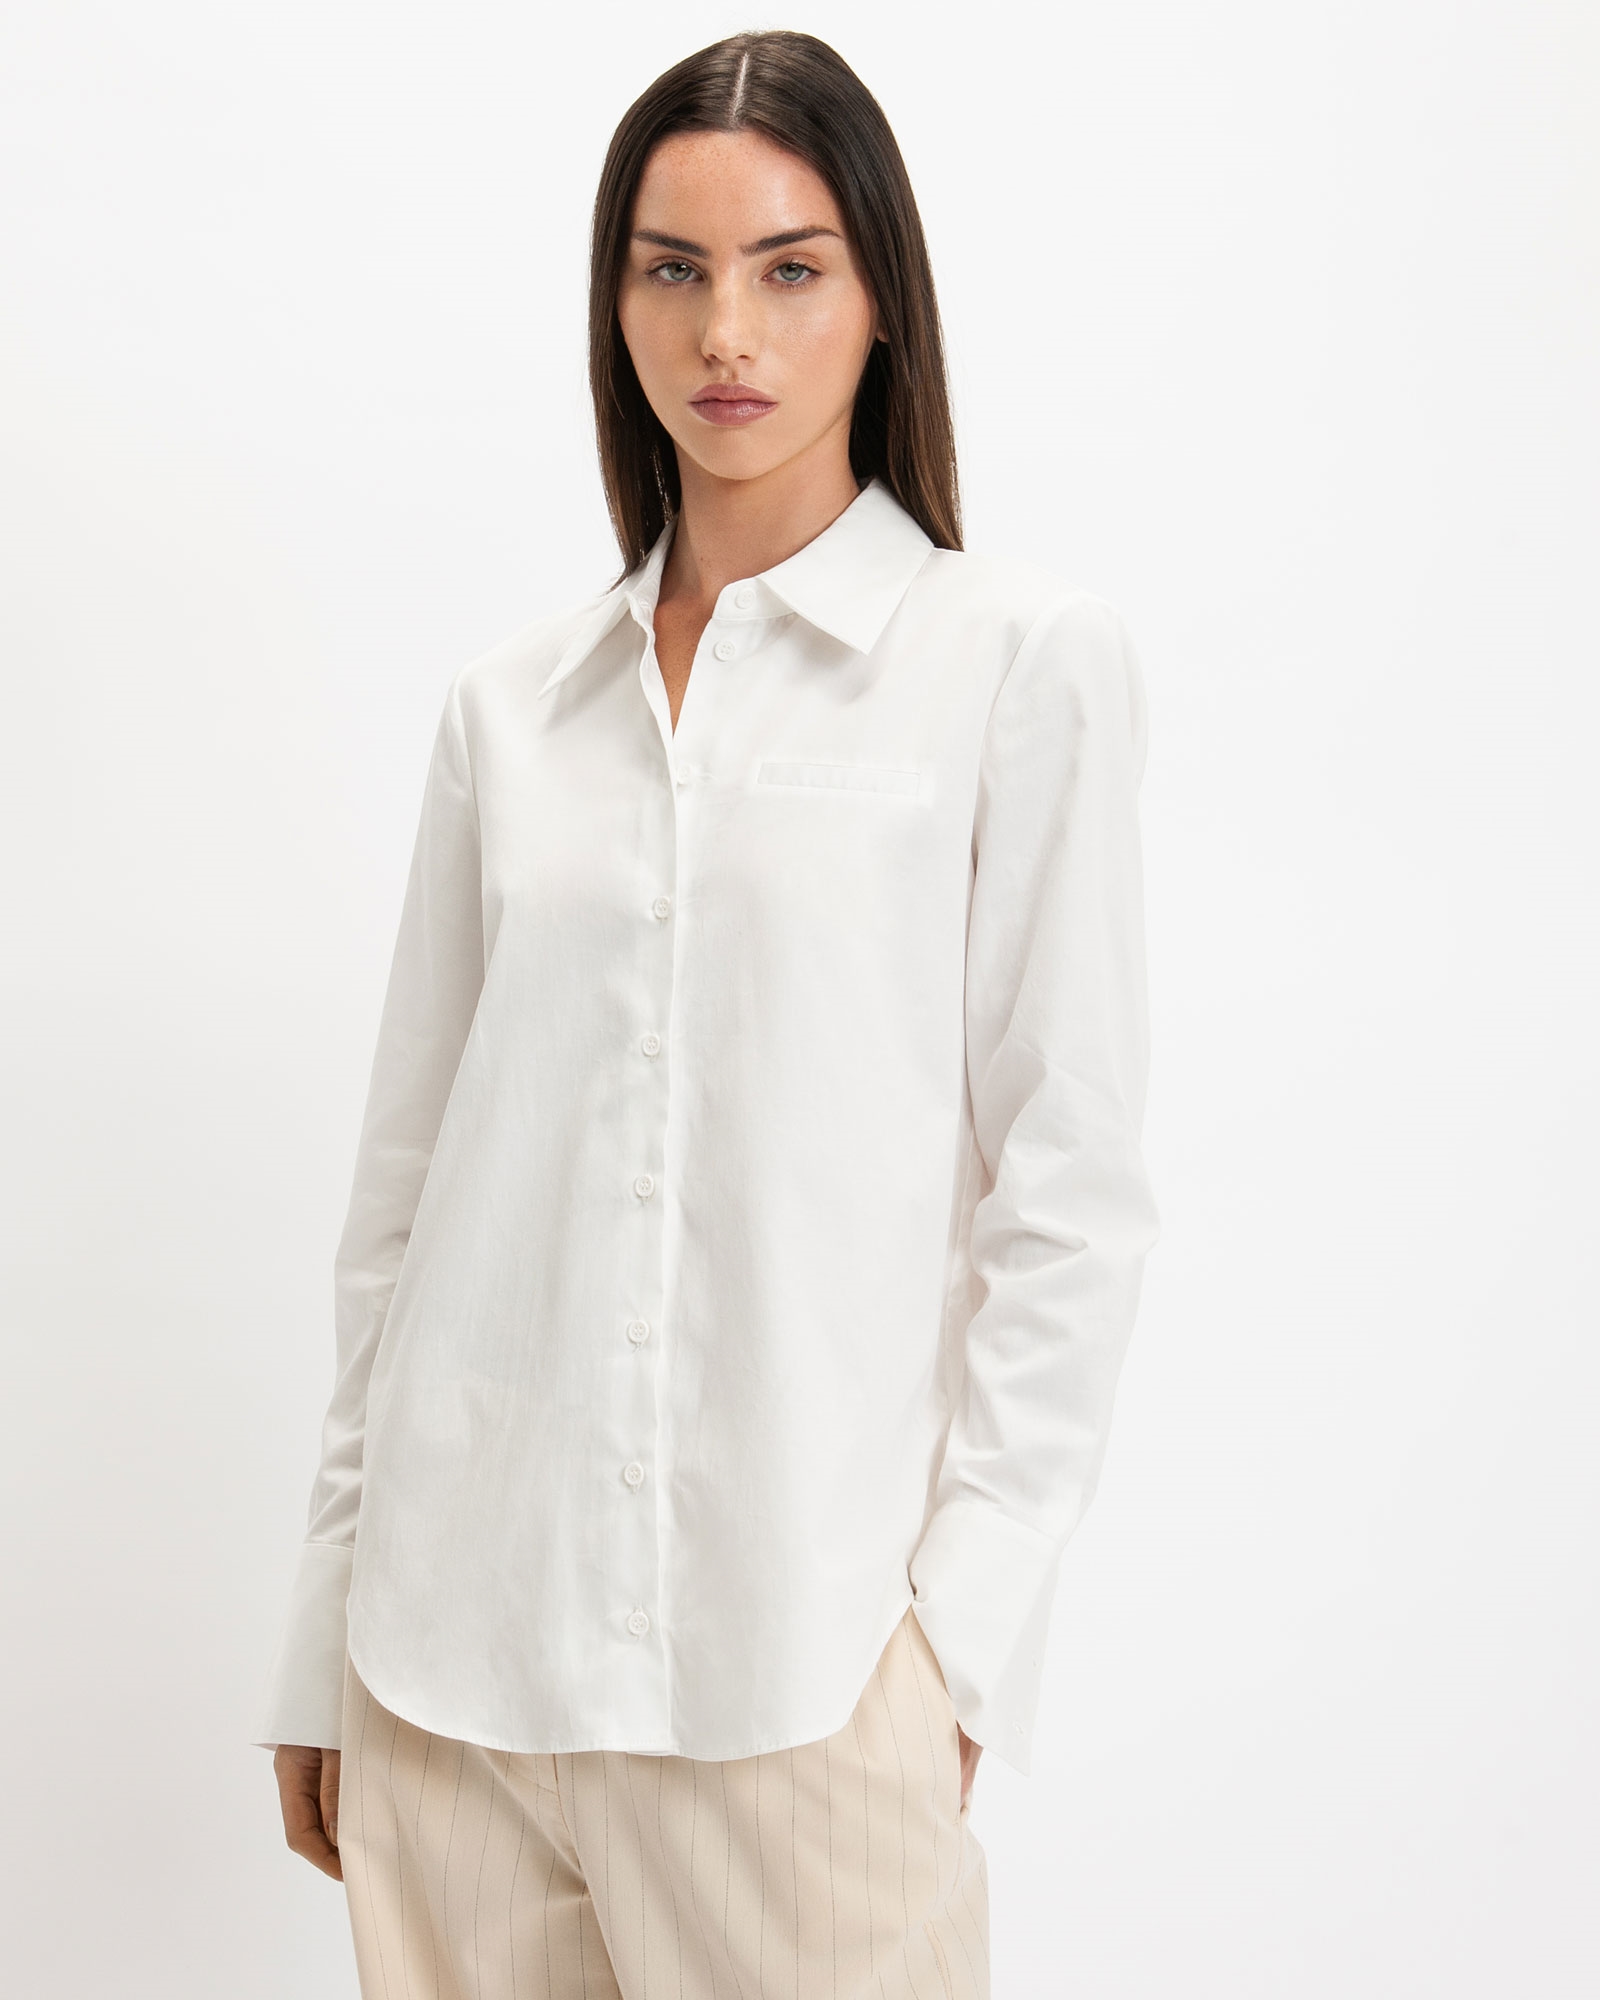 Welt Detail Shirt | Buy Tops and Shirts Online - Cue